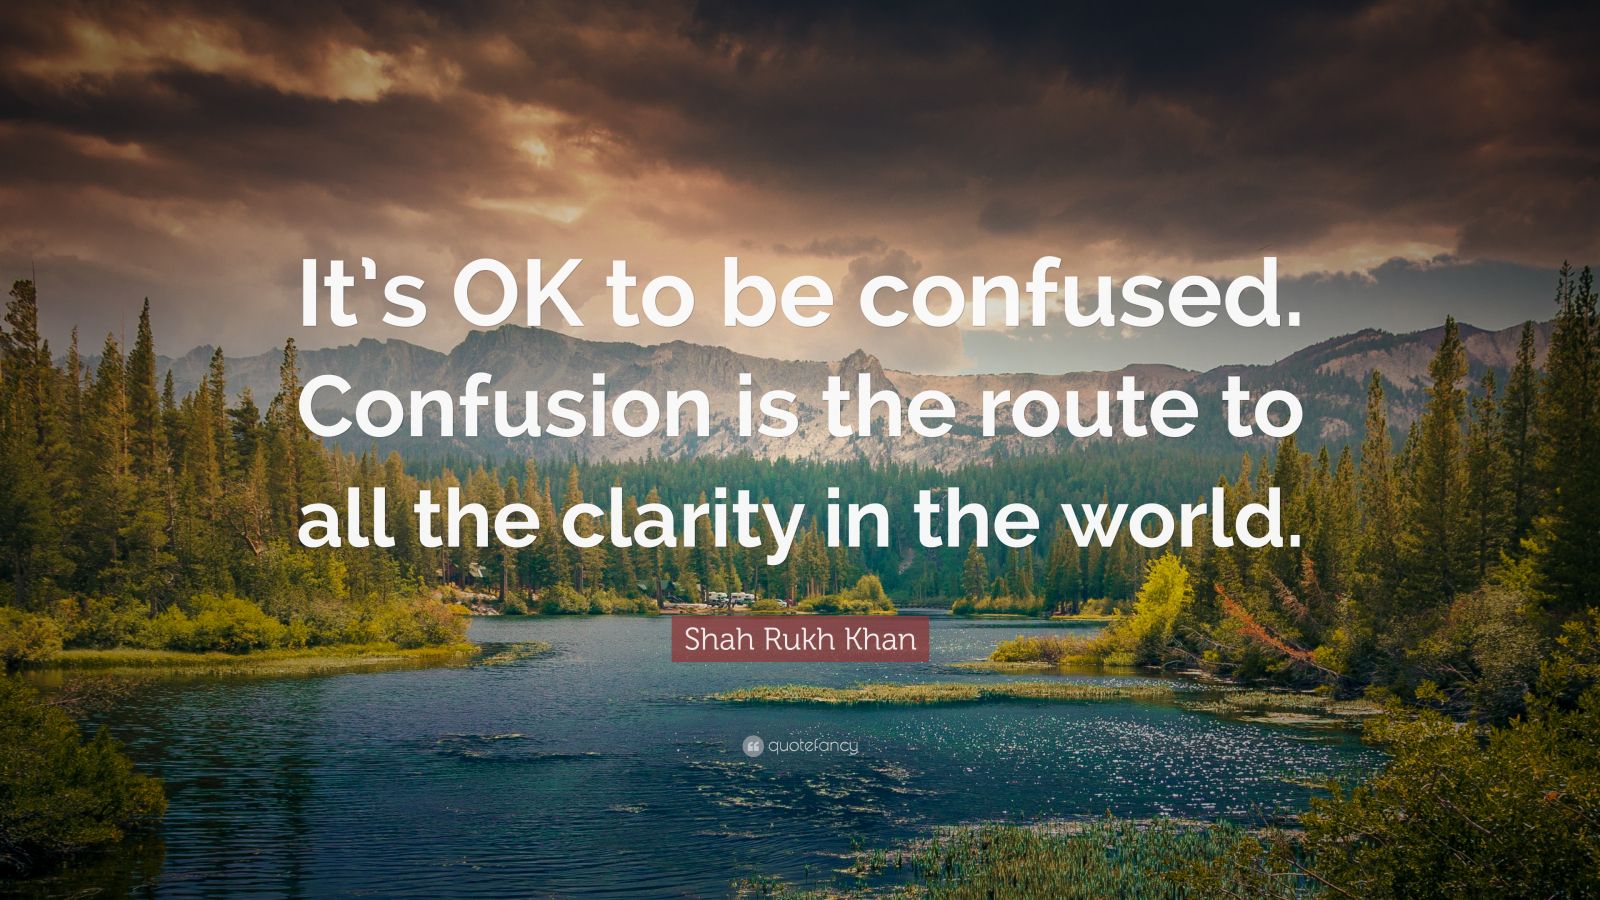 Shah Rukh Khan Quote: “It’s OK to be confused. Confusion is the route